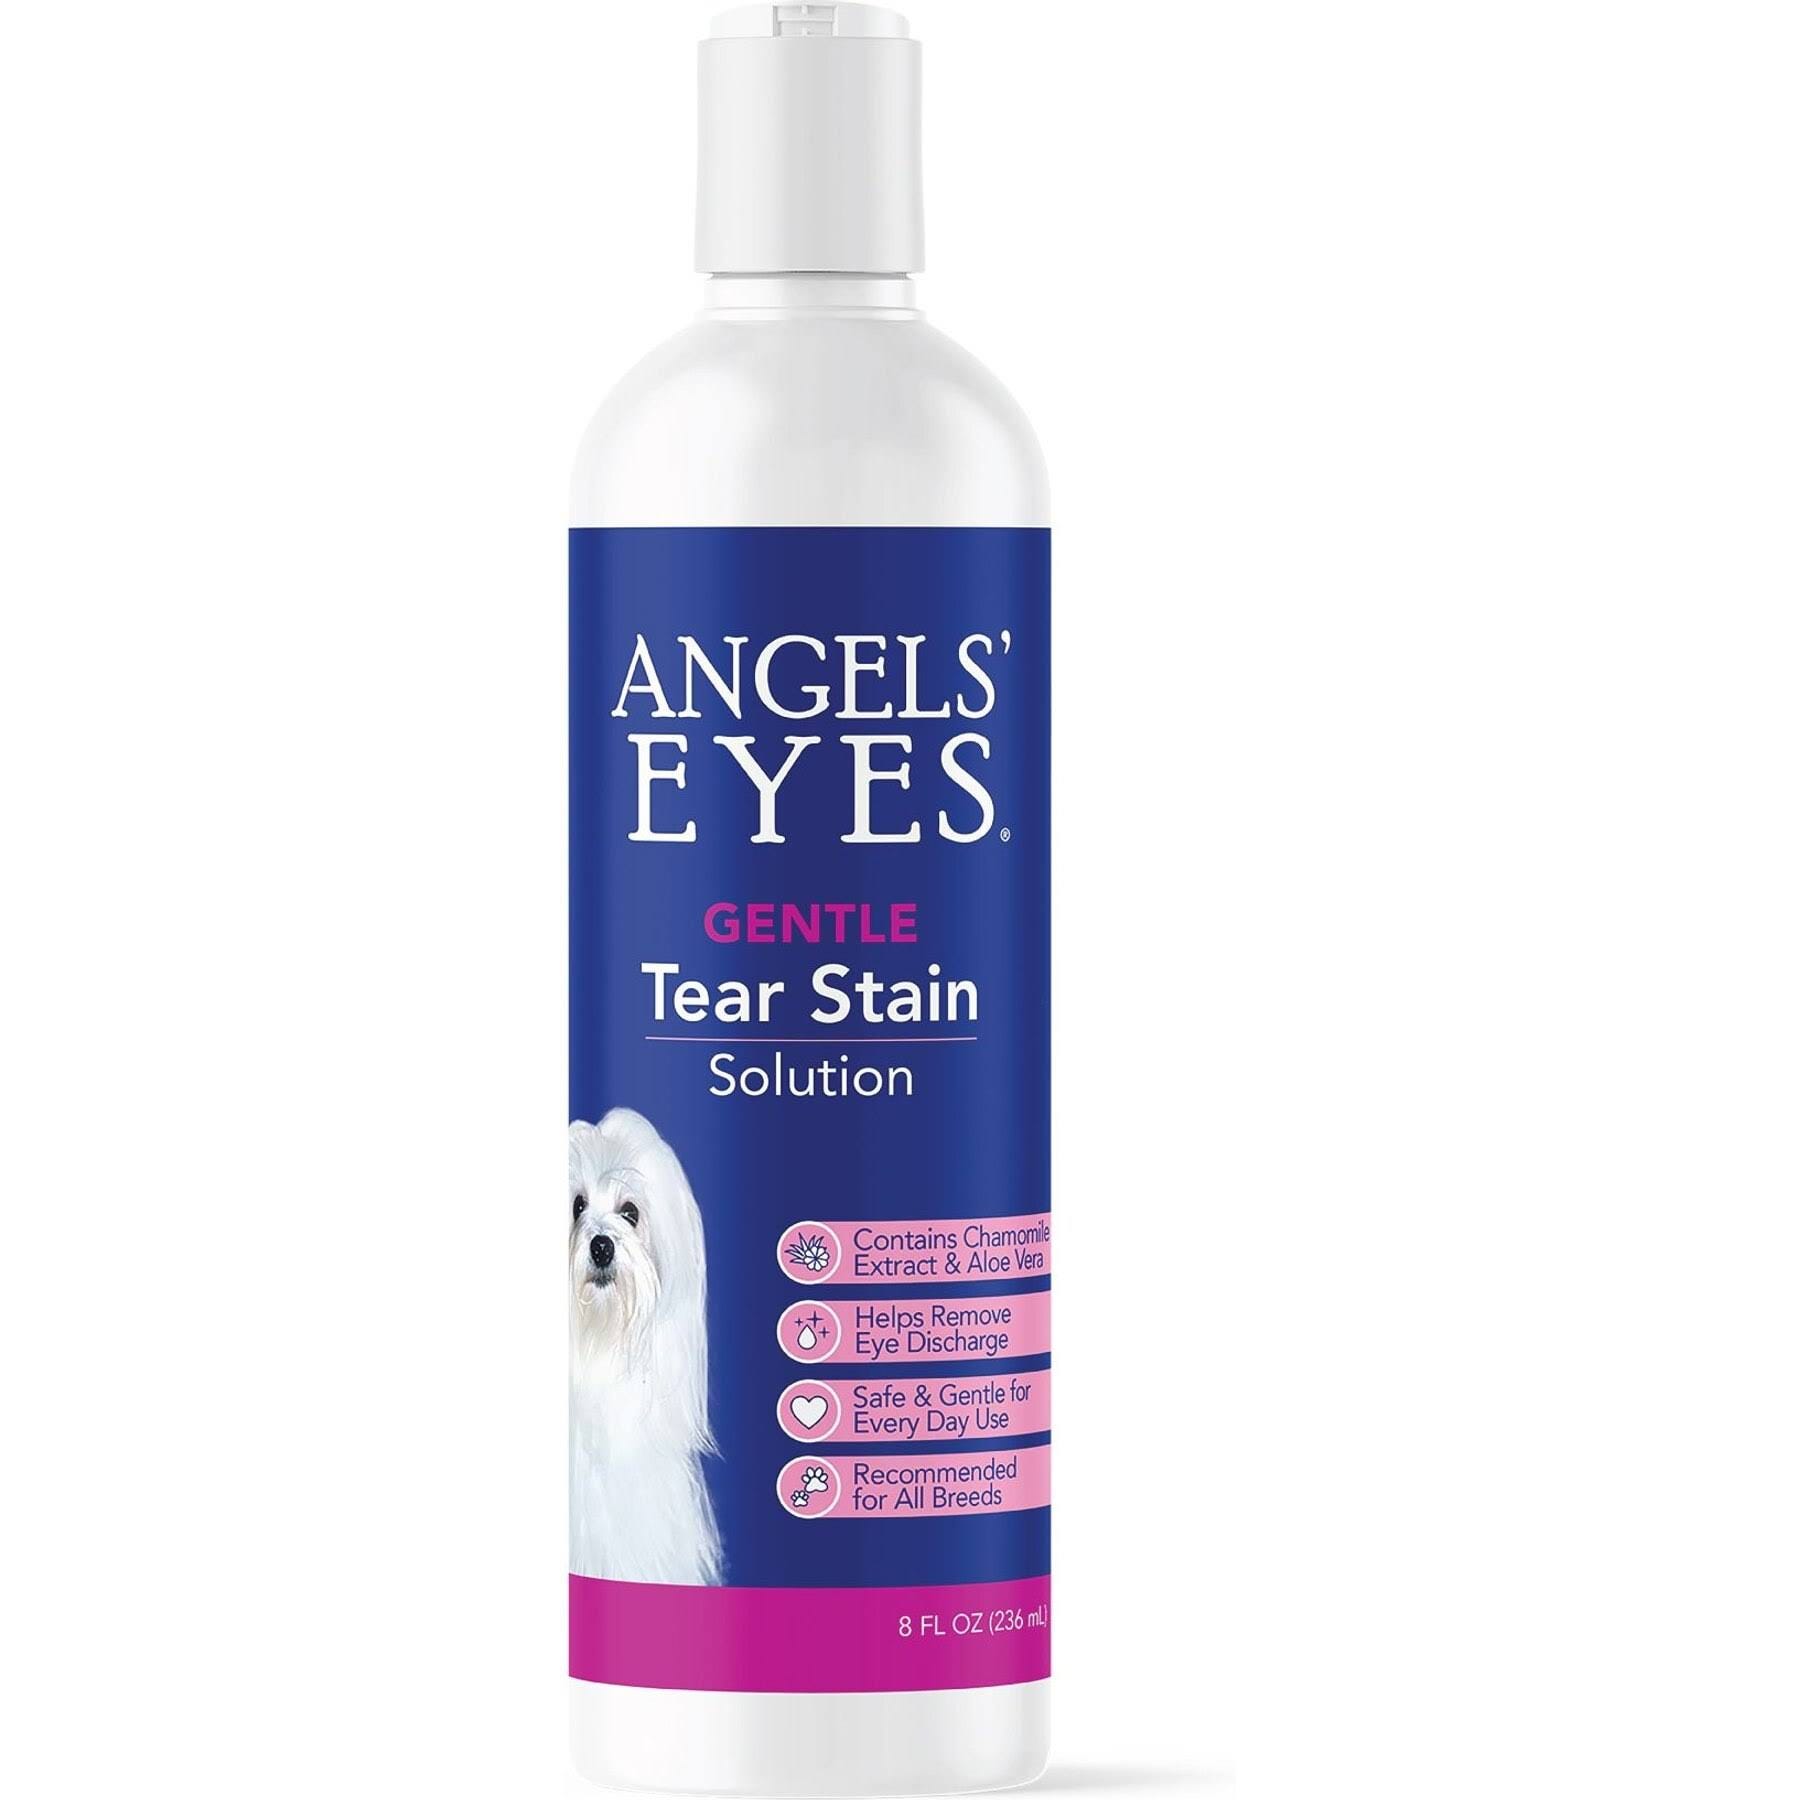 Angels' Eyes Tear Stain Solution: Gentle Dog and Cat Eye Drops | Image